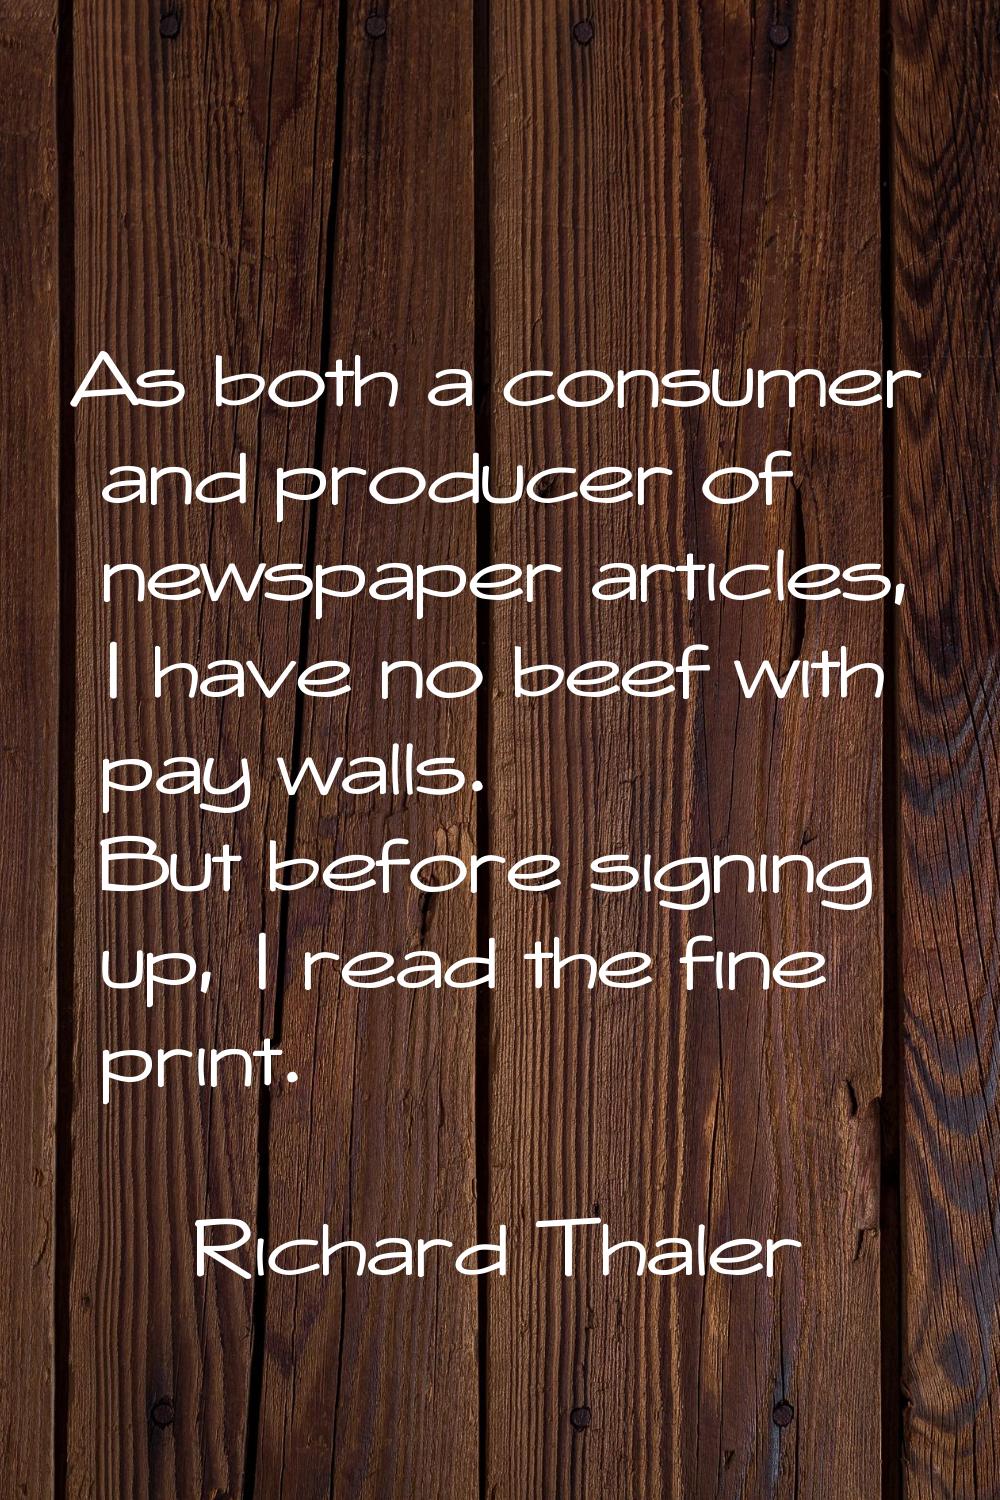 As both a consumer and producer of newspaper articles, I have no beef with pay walls. But before si